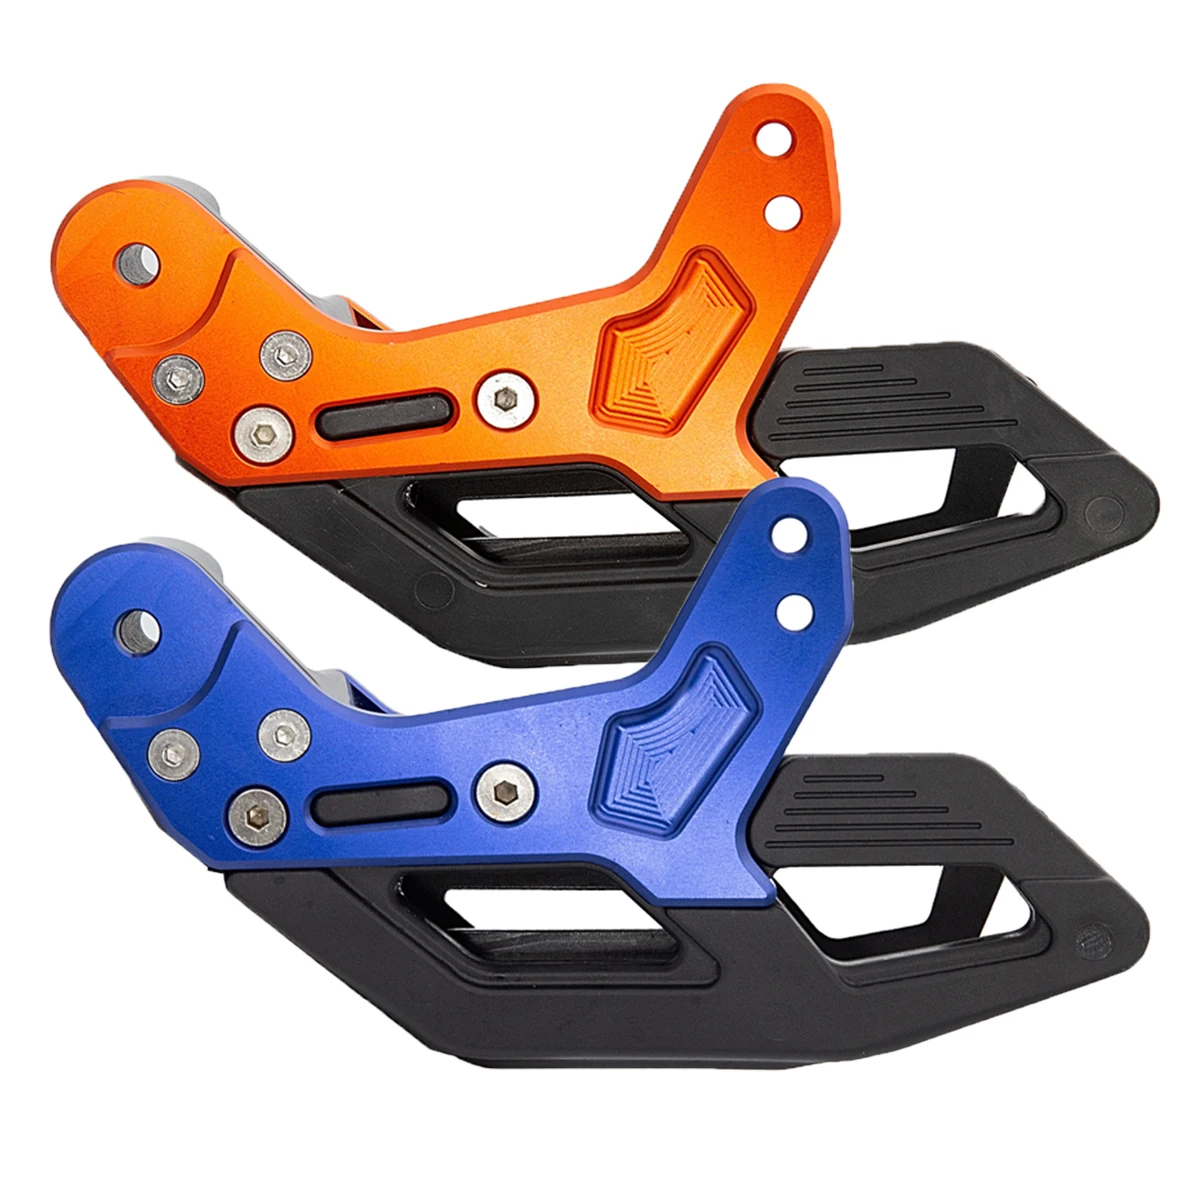 

Motorcycle Chain Guide Guard For KTM SX SXF EXC EXCF XC XCW XCF XCFW 690 Enduro SMC SMR For Husaber Husqvarn 125 -530